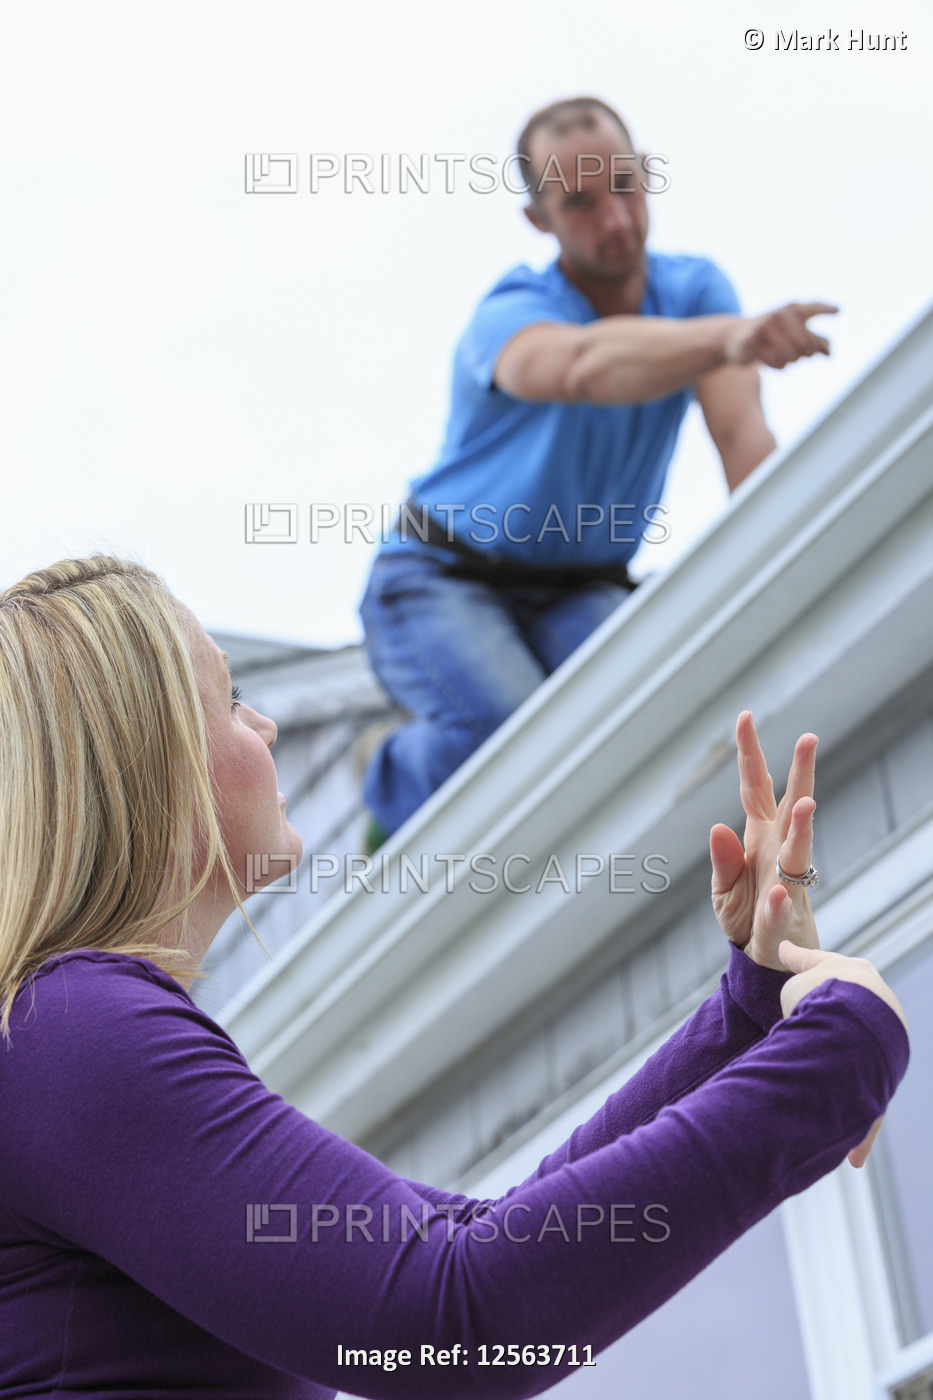 Homeowner and roofer communicating in American Sign Language about 'Leaking' ...